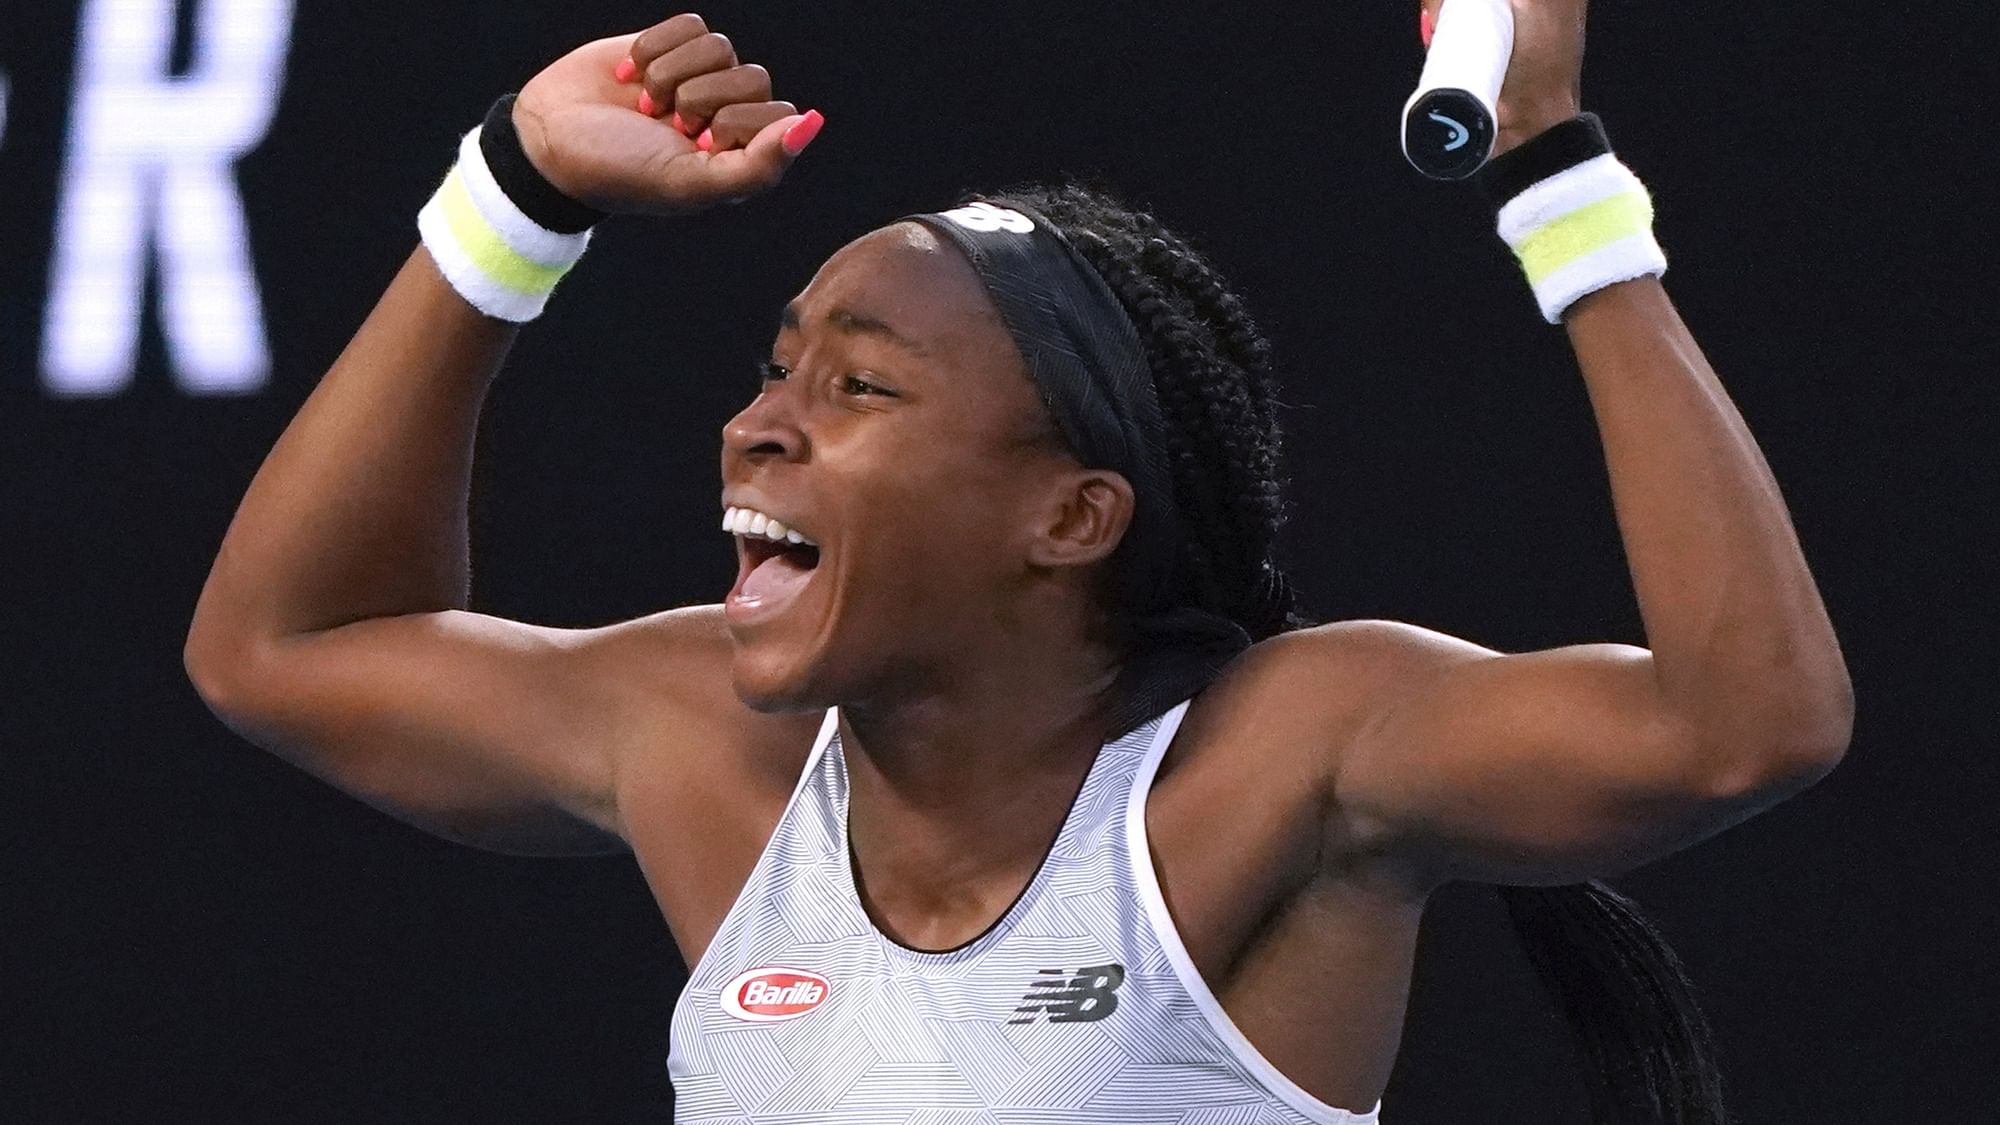 Unseeded 15-year-old Coco Gauff beat reigning champion Naomi Osaka in straight sets in a major upset at the Australian Open on Friday, 24 January.